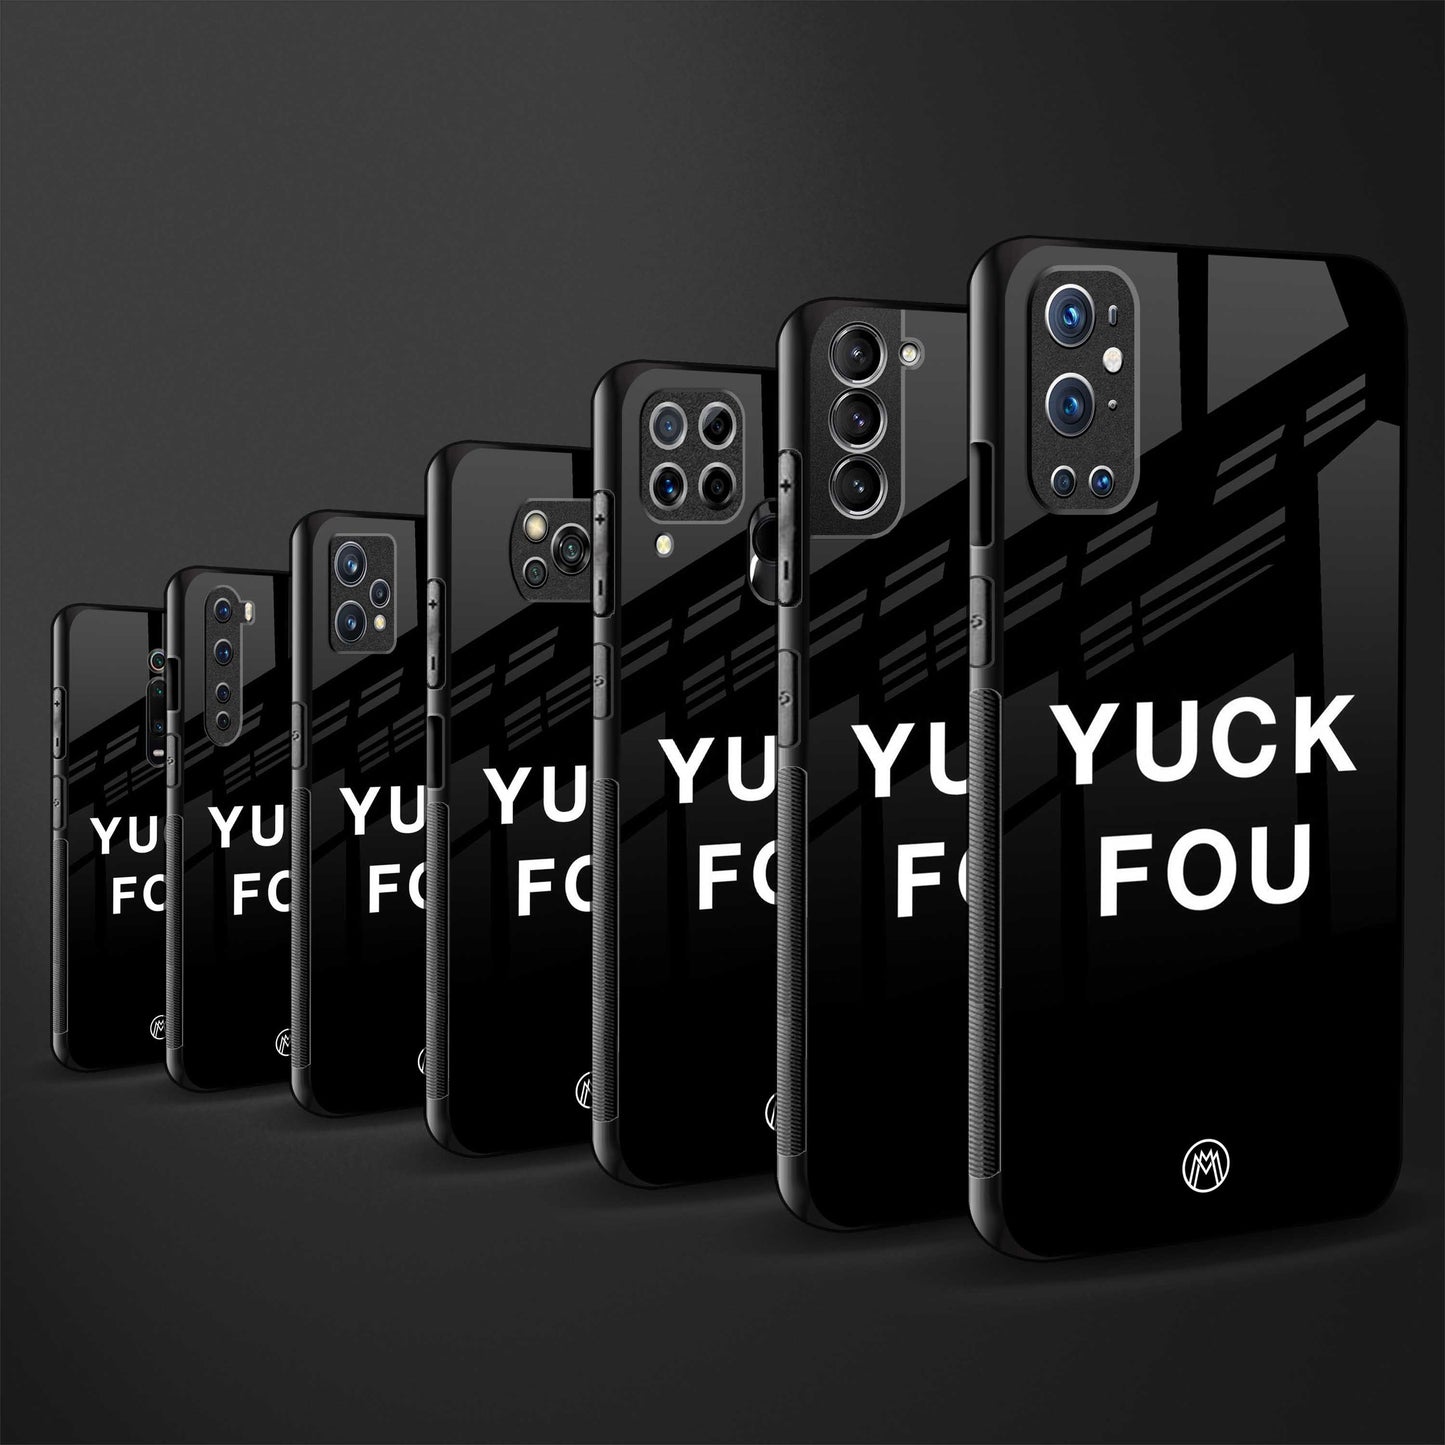 yuck fou glass case for iphone 6s plus image-3